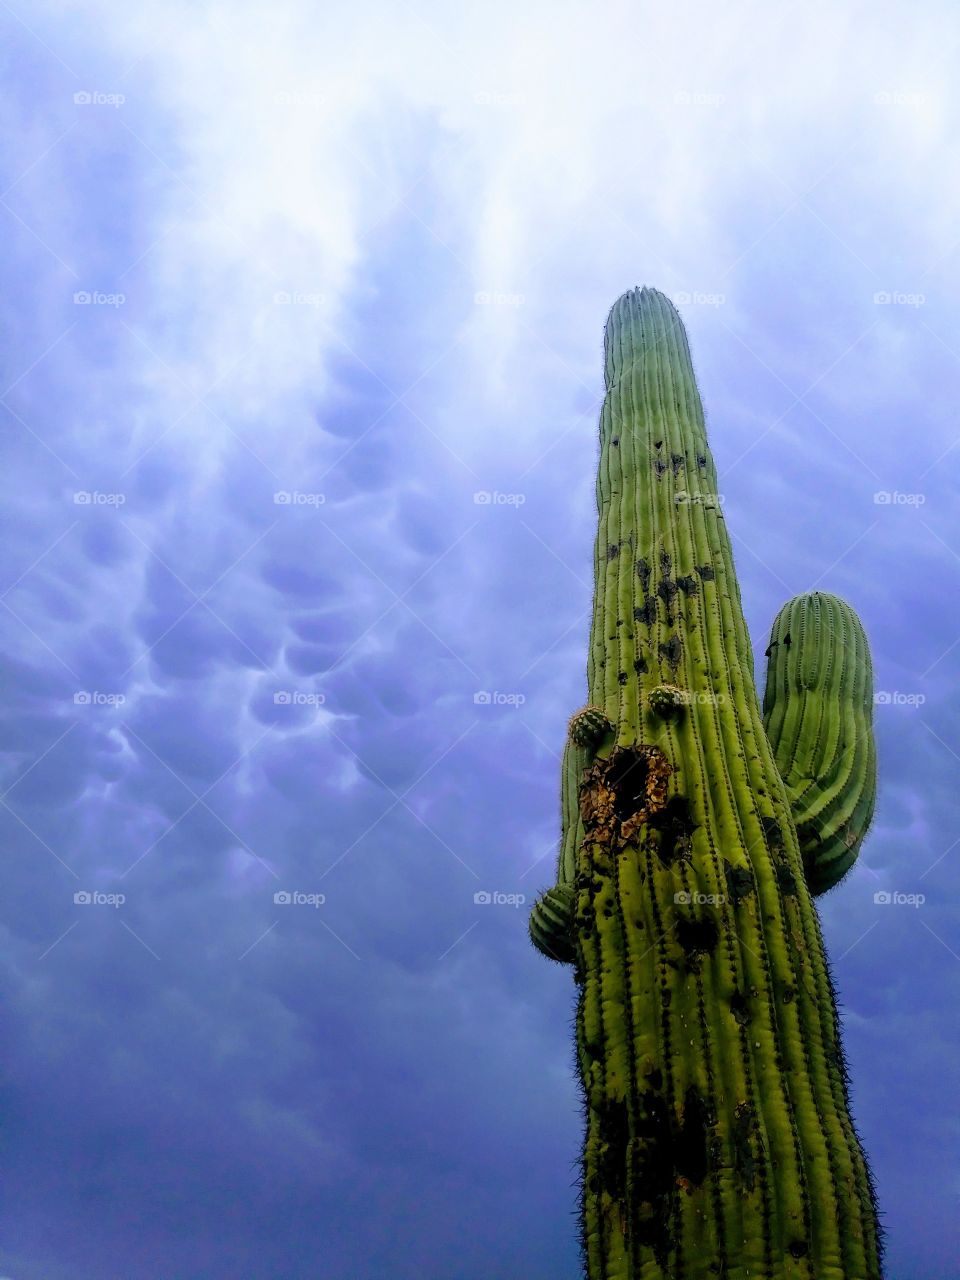 beautiful saguaro toward a stormy sky which I think makes it makes it look underwater